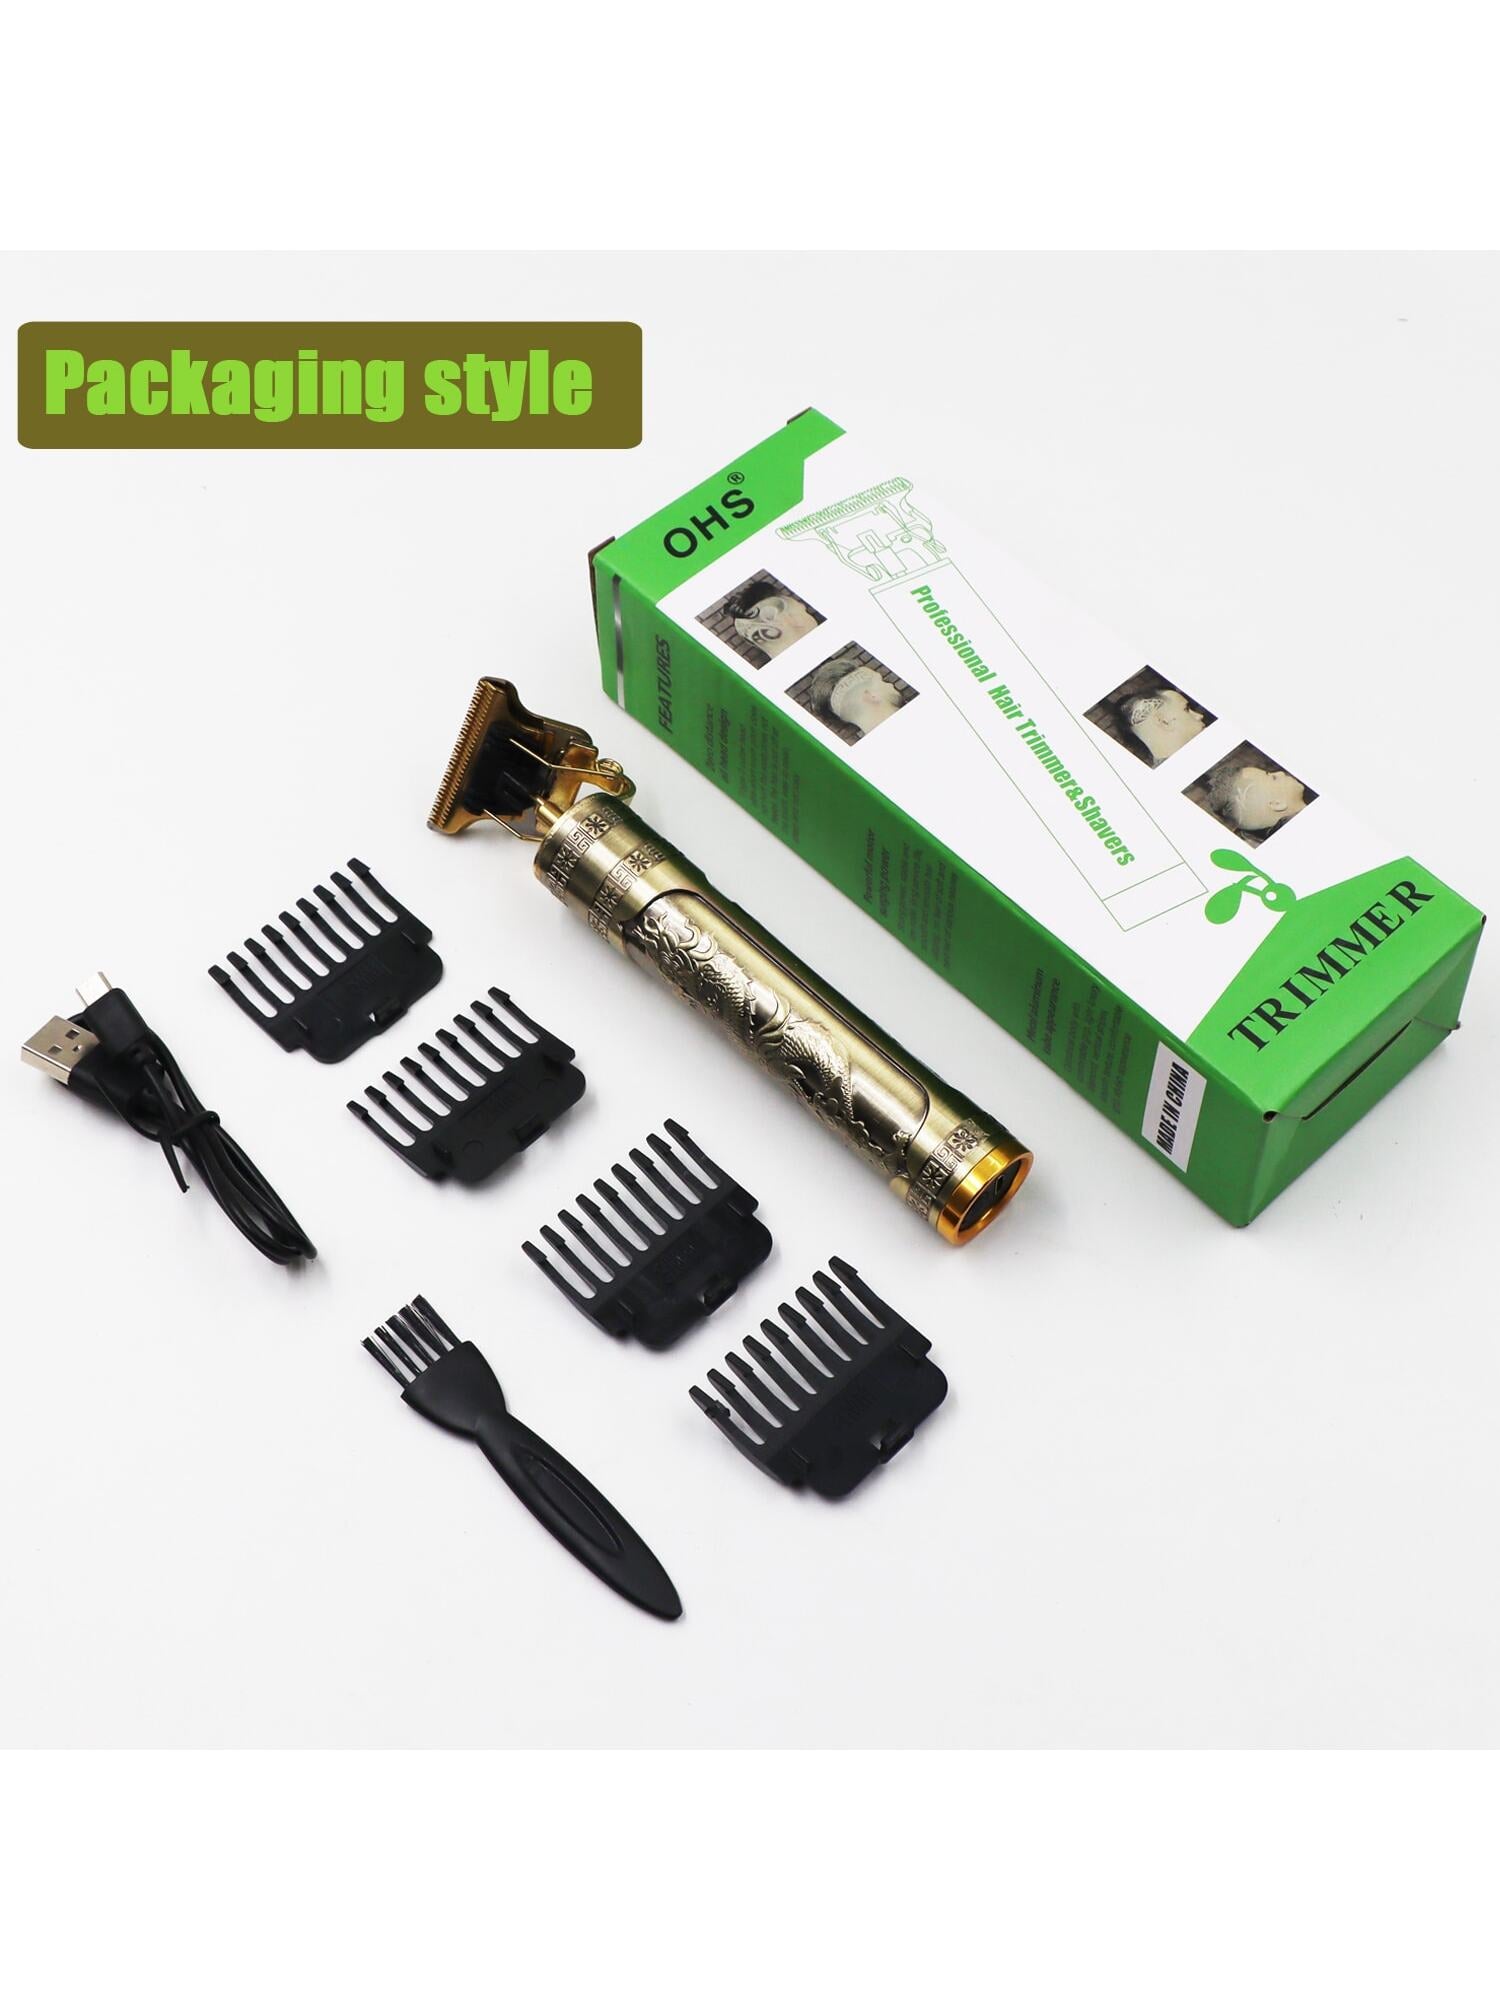 1 Set Metal Usb Charging Hair Clipper & Shaver T9 For Professional Beard Triming, Feature Chinese Dragon & Phoenix Pattern, Suitable For Male Barber-S1 Dragon-5